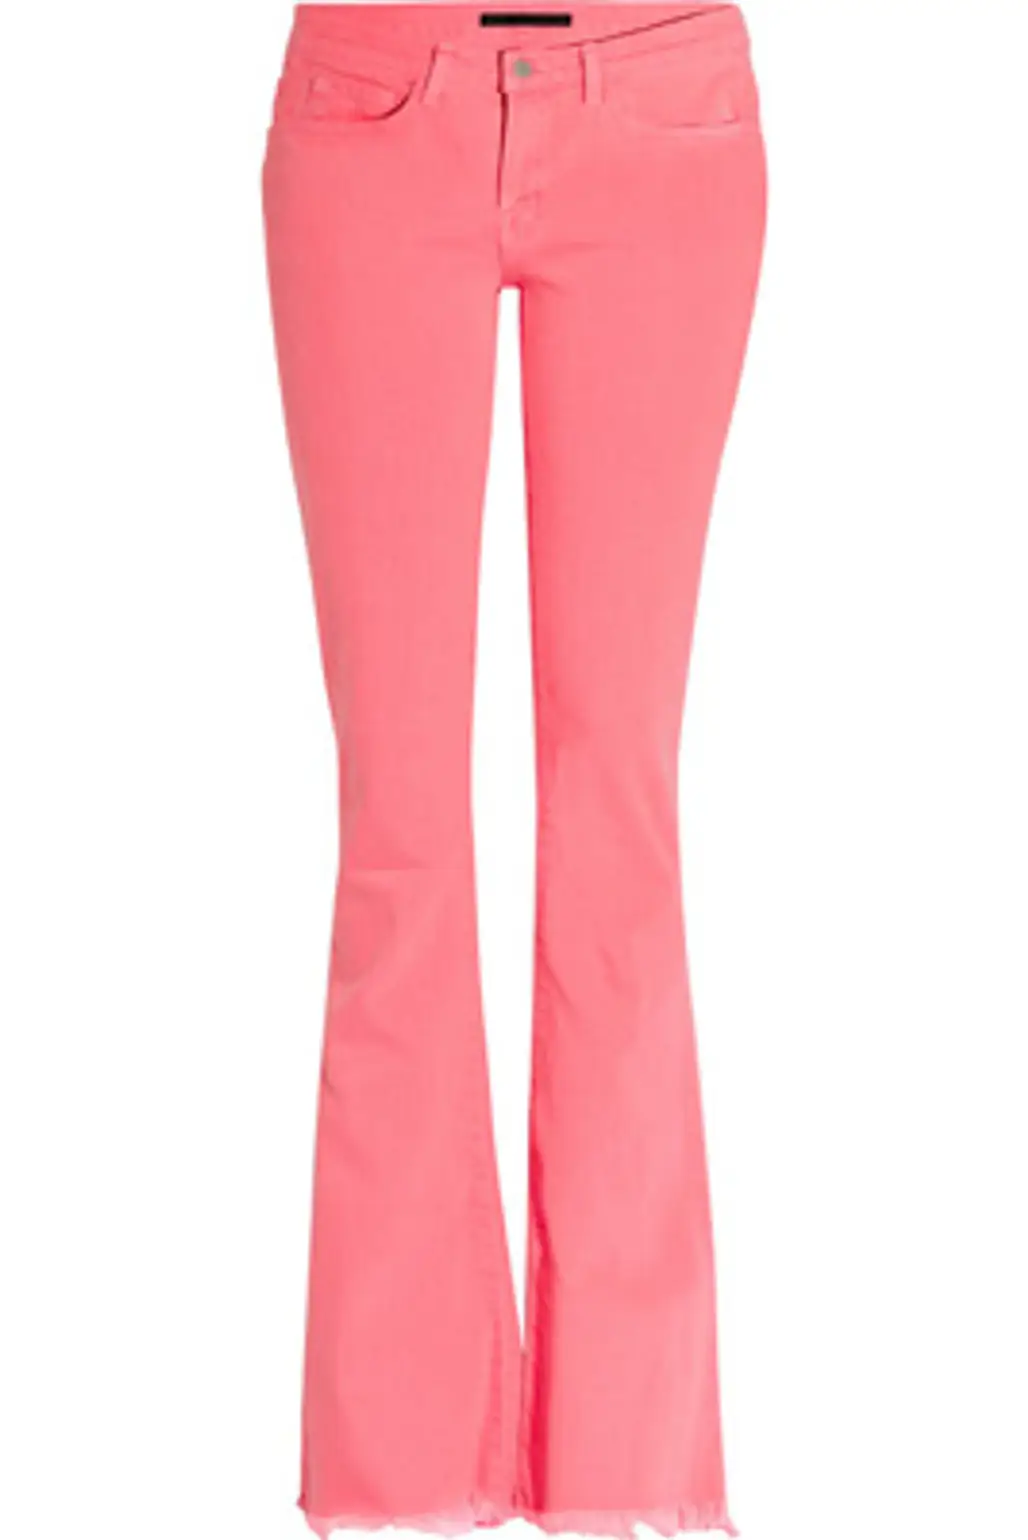 Flared Pink Pants